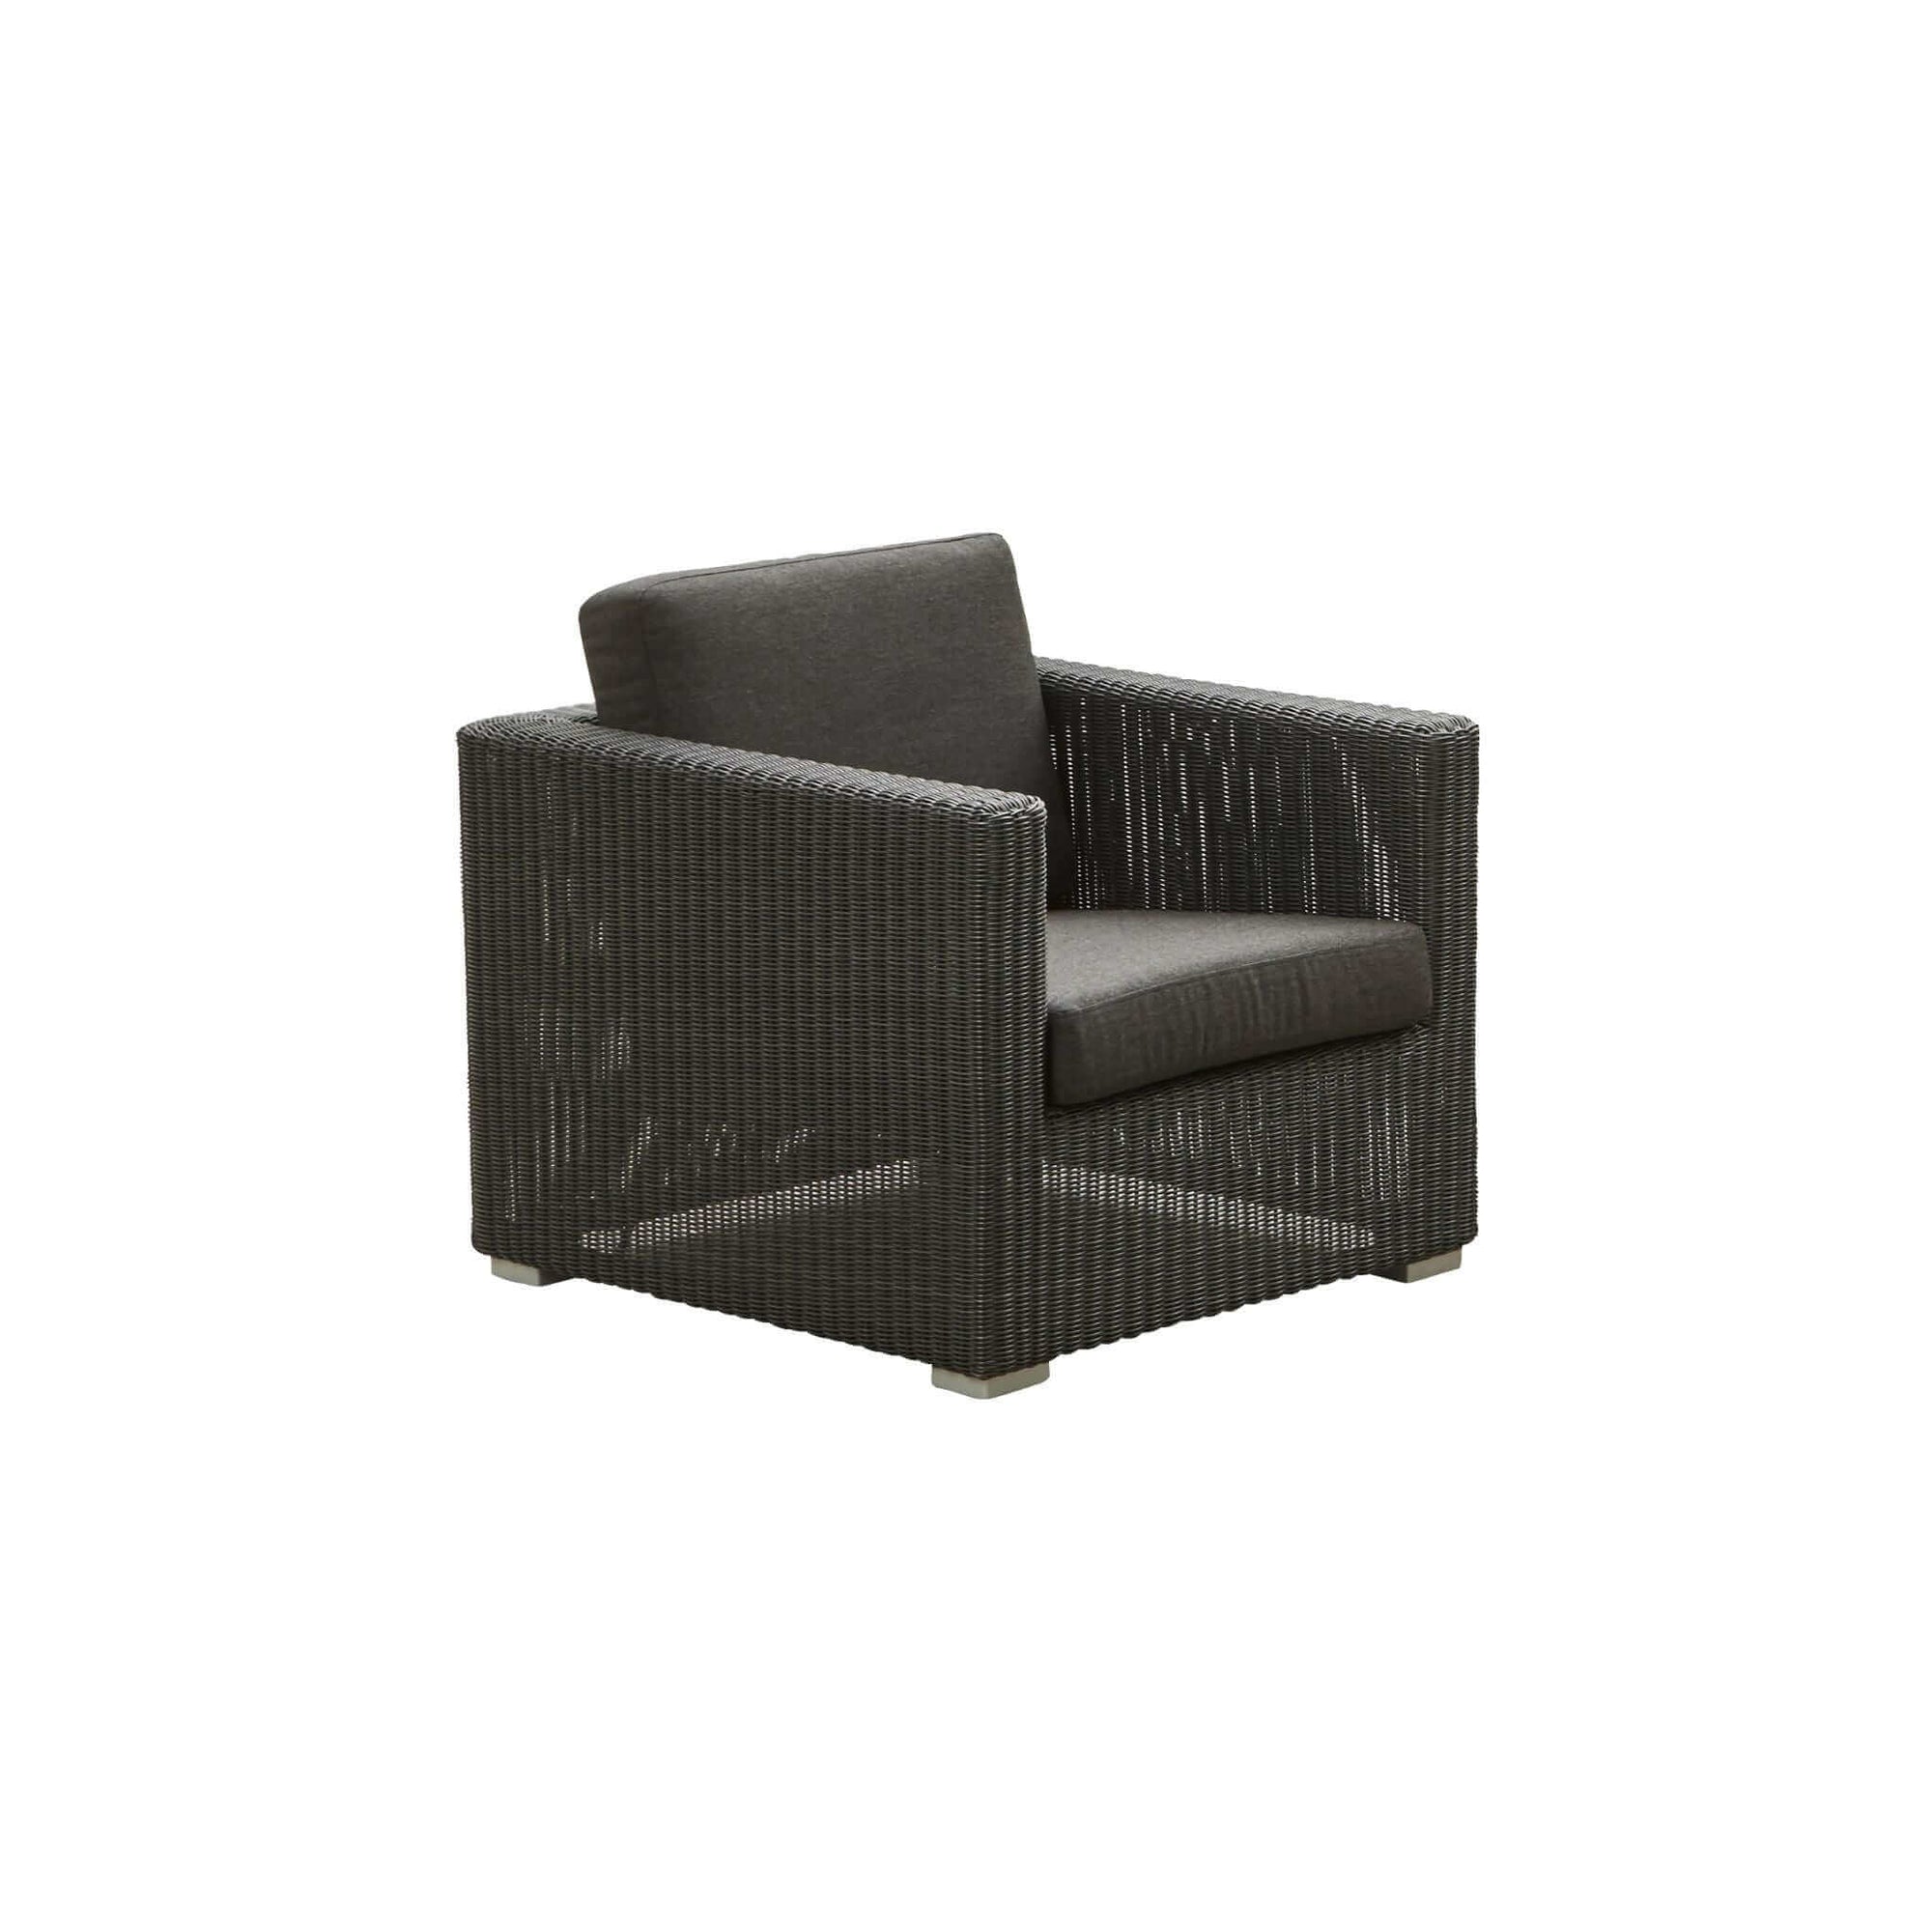 Cane-Line Chester Lounge Chair-Graphite, Cane-line Weave